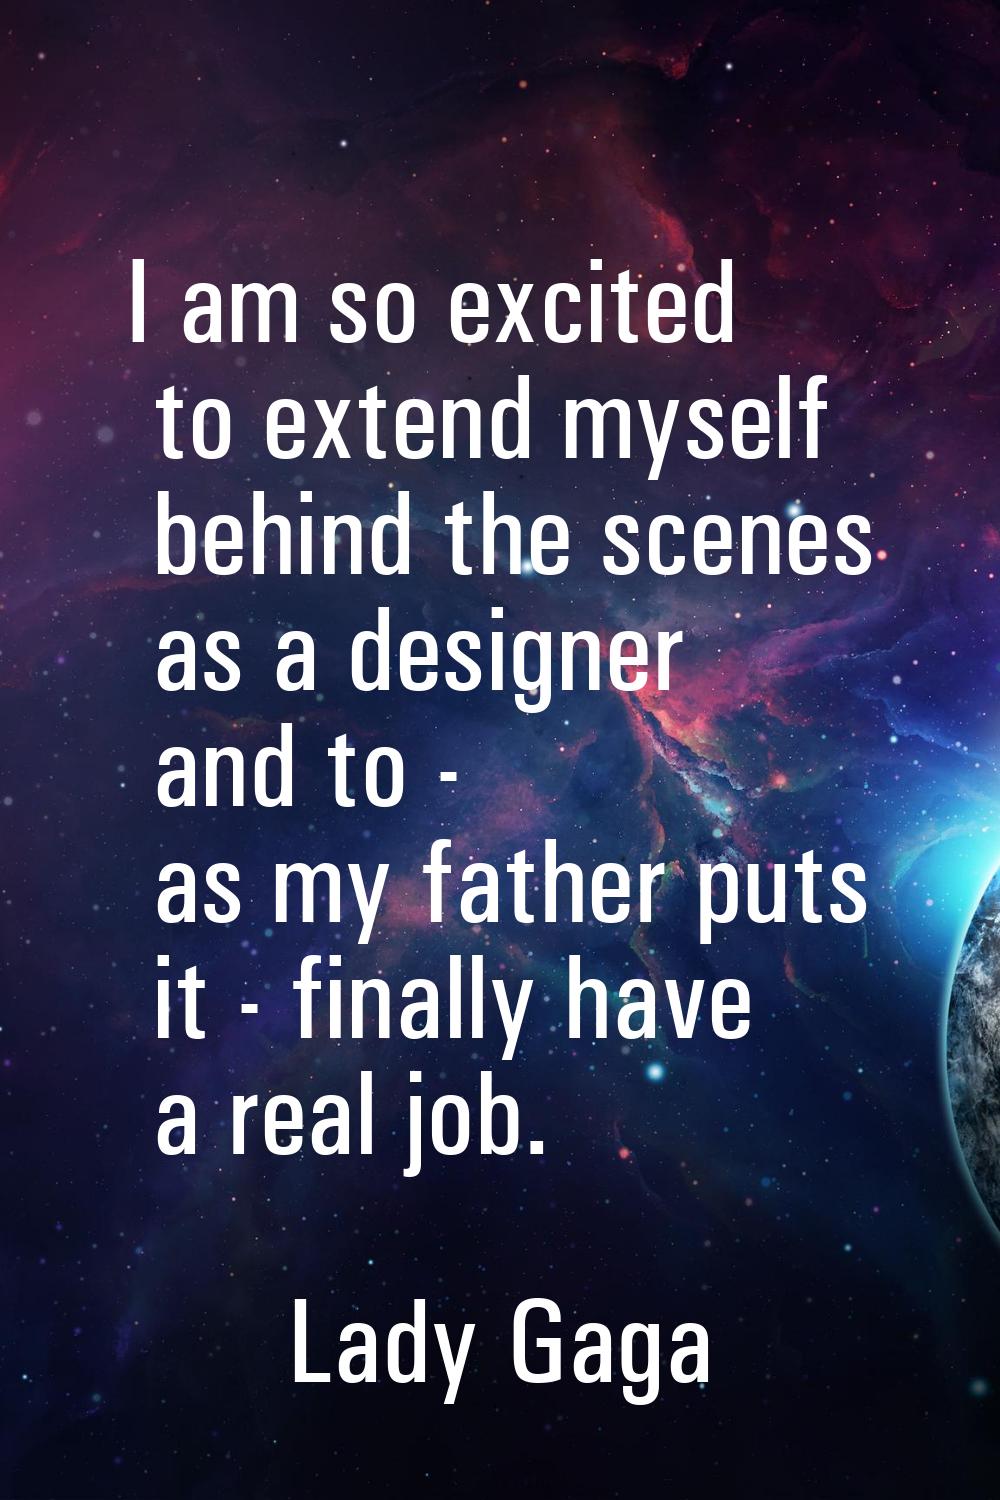 I am so excited to extend myself behind the scenes as a designer and to - as my father puts it - fi